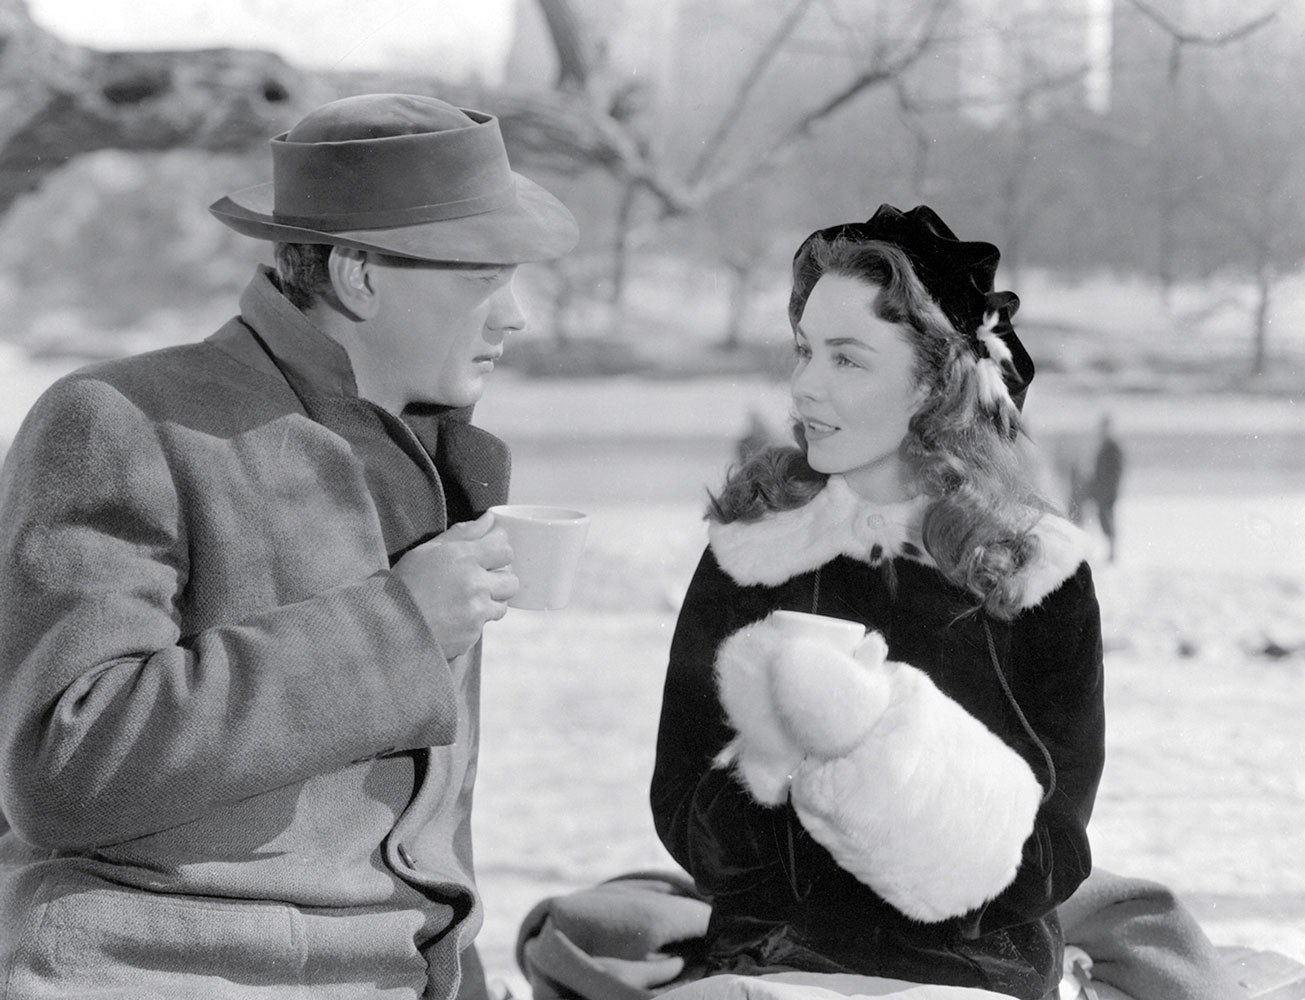 A still from William Dieterle’s nineteen forty-eight film “Portrait of Jennie”, showing Joseph Cotten and Jennifer Jones sipping hot chocolate in Central Park. 